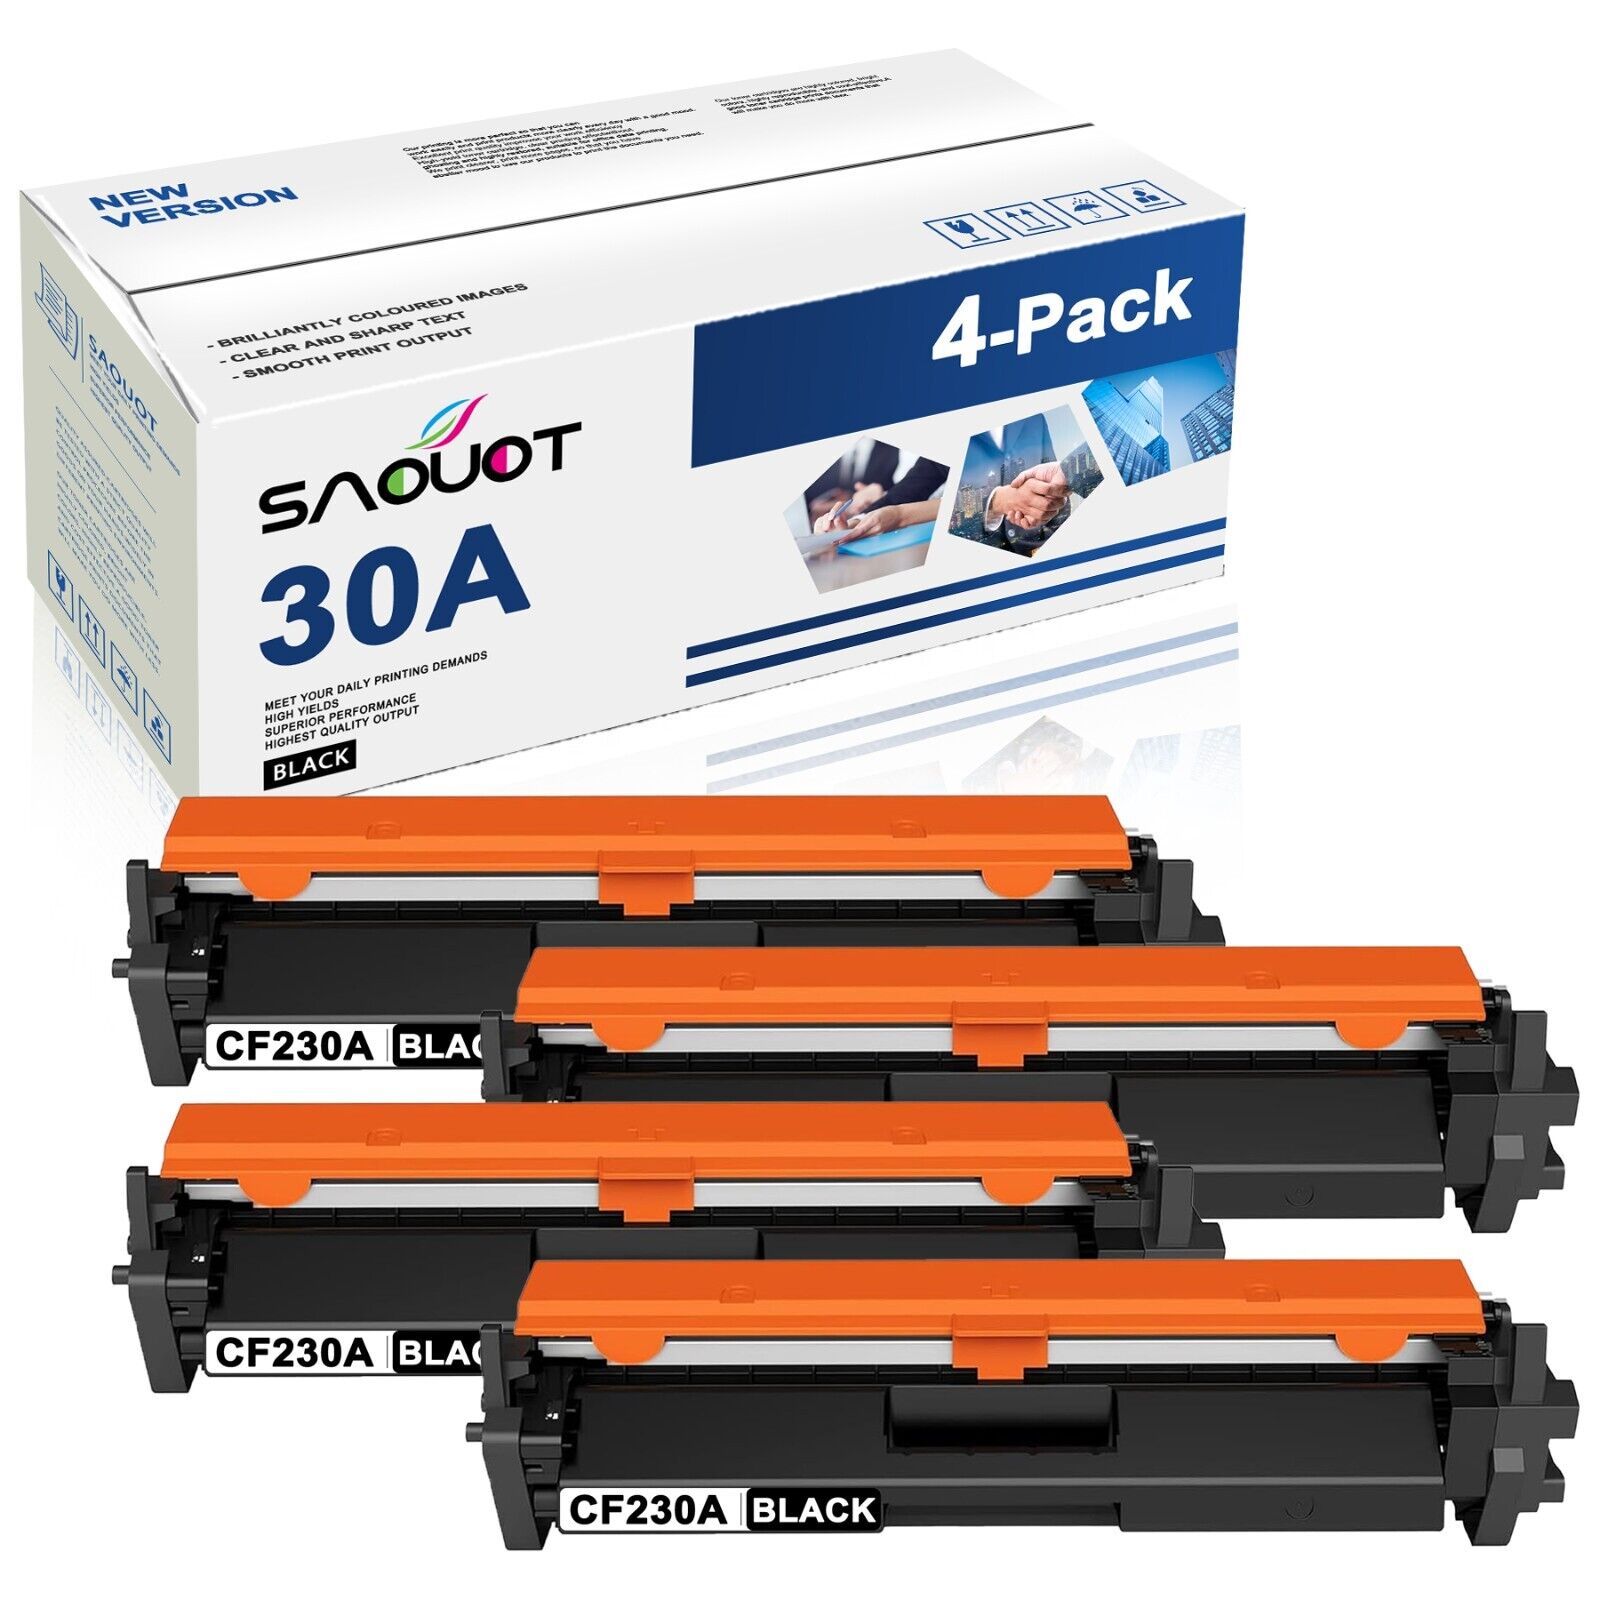 CF230A Brand New Toner Cartridge Replacement for HP 30A Pro MFP M227fdw M227sdn